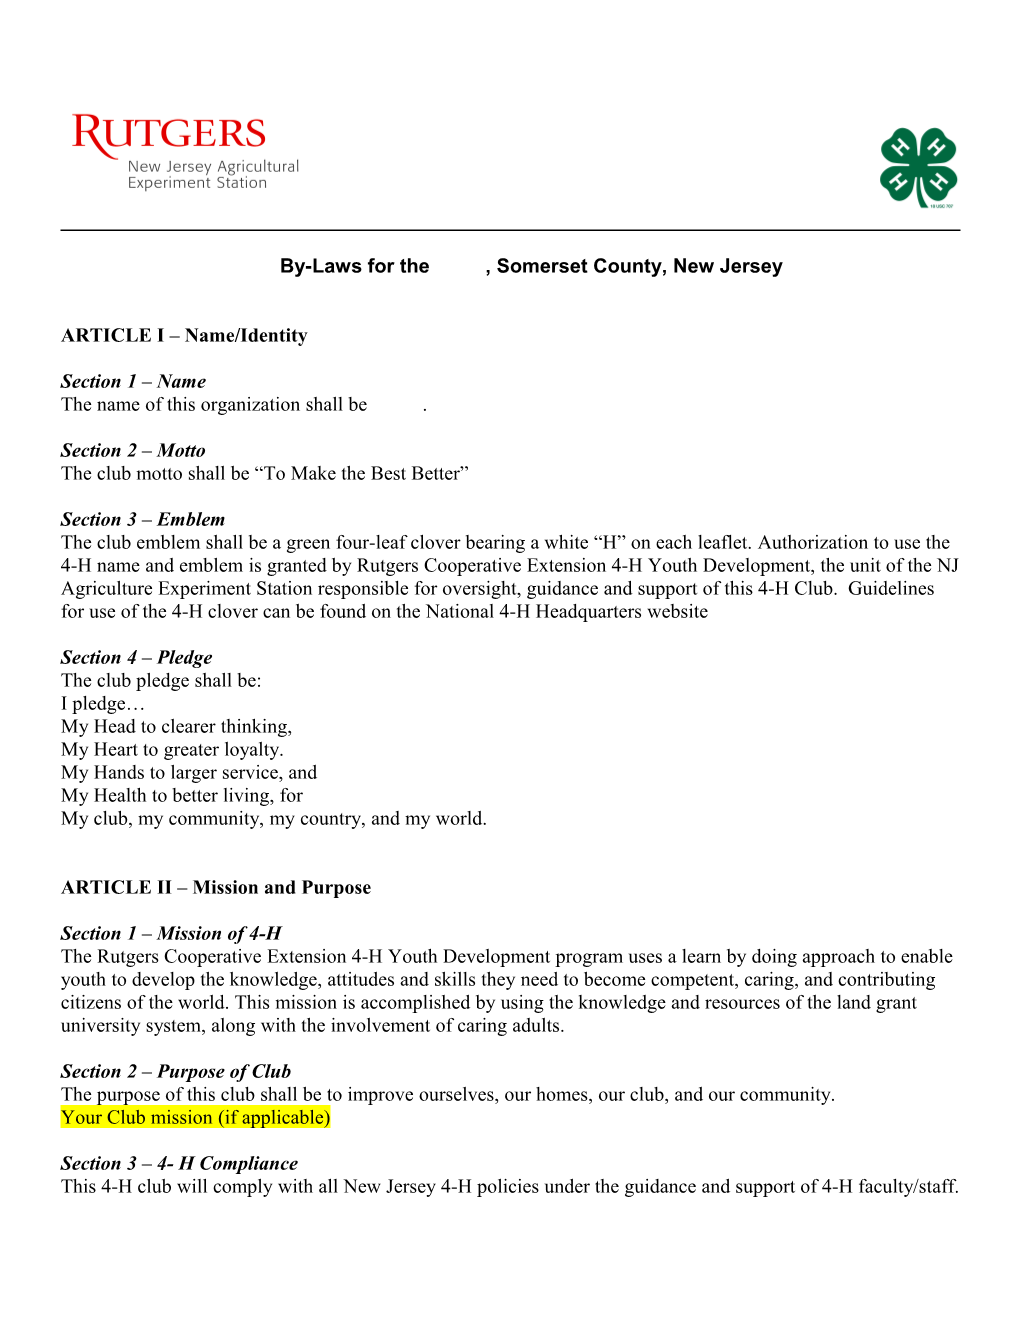 Constitution for the ______ 4-H Club, Burlington County New Jersey